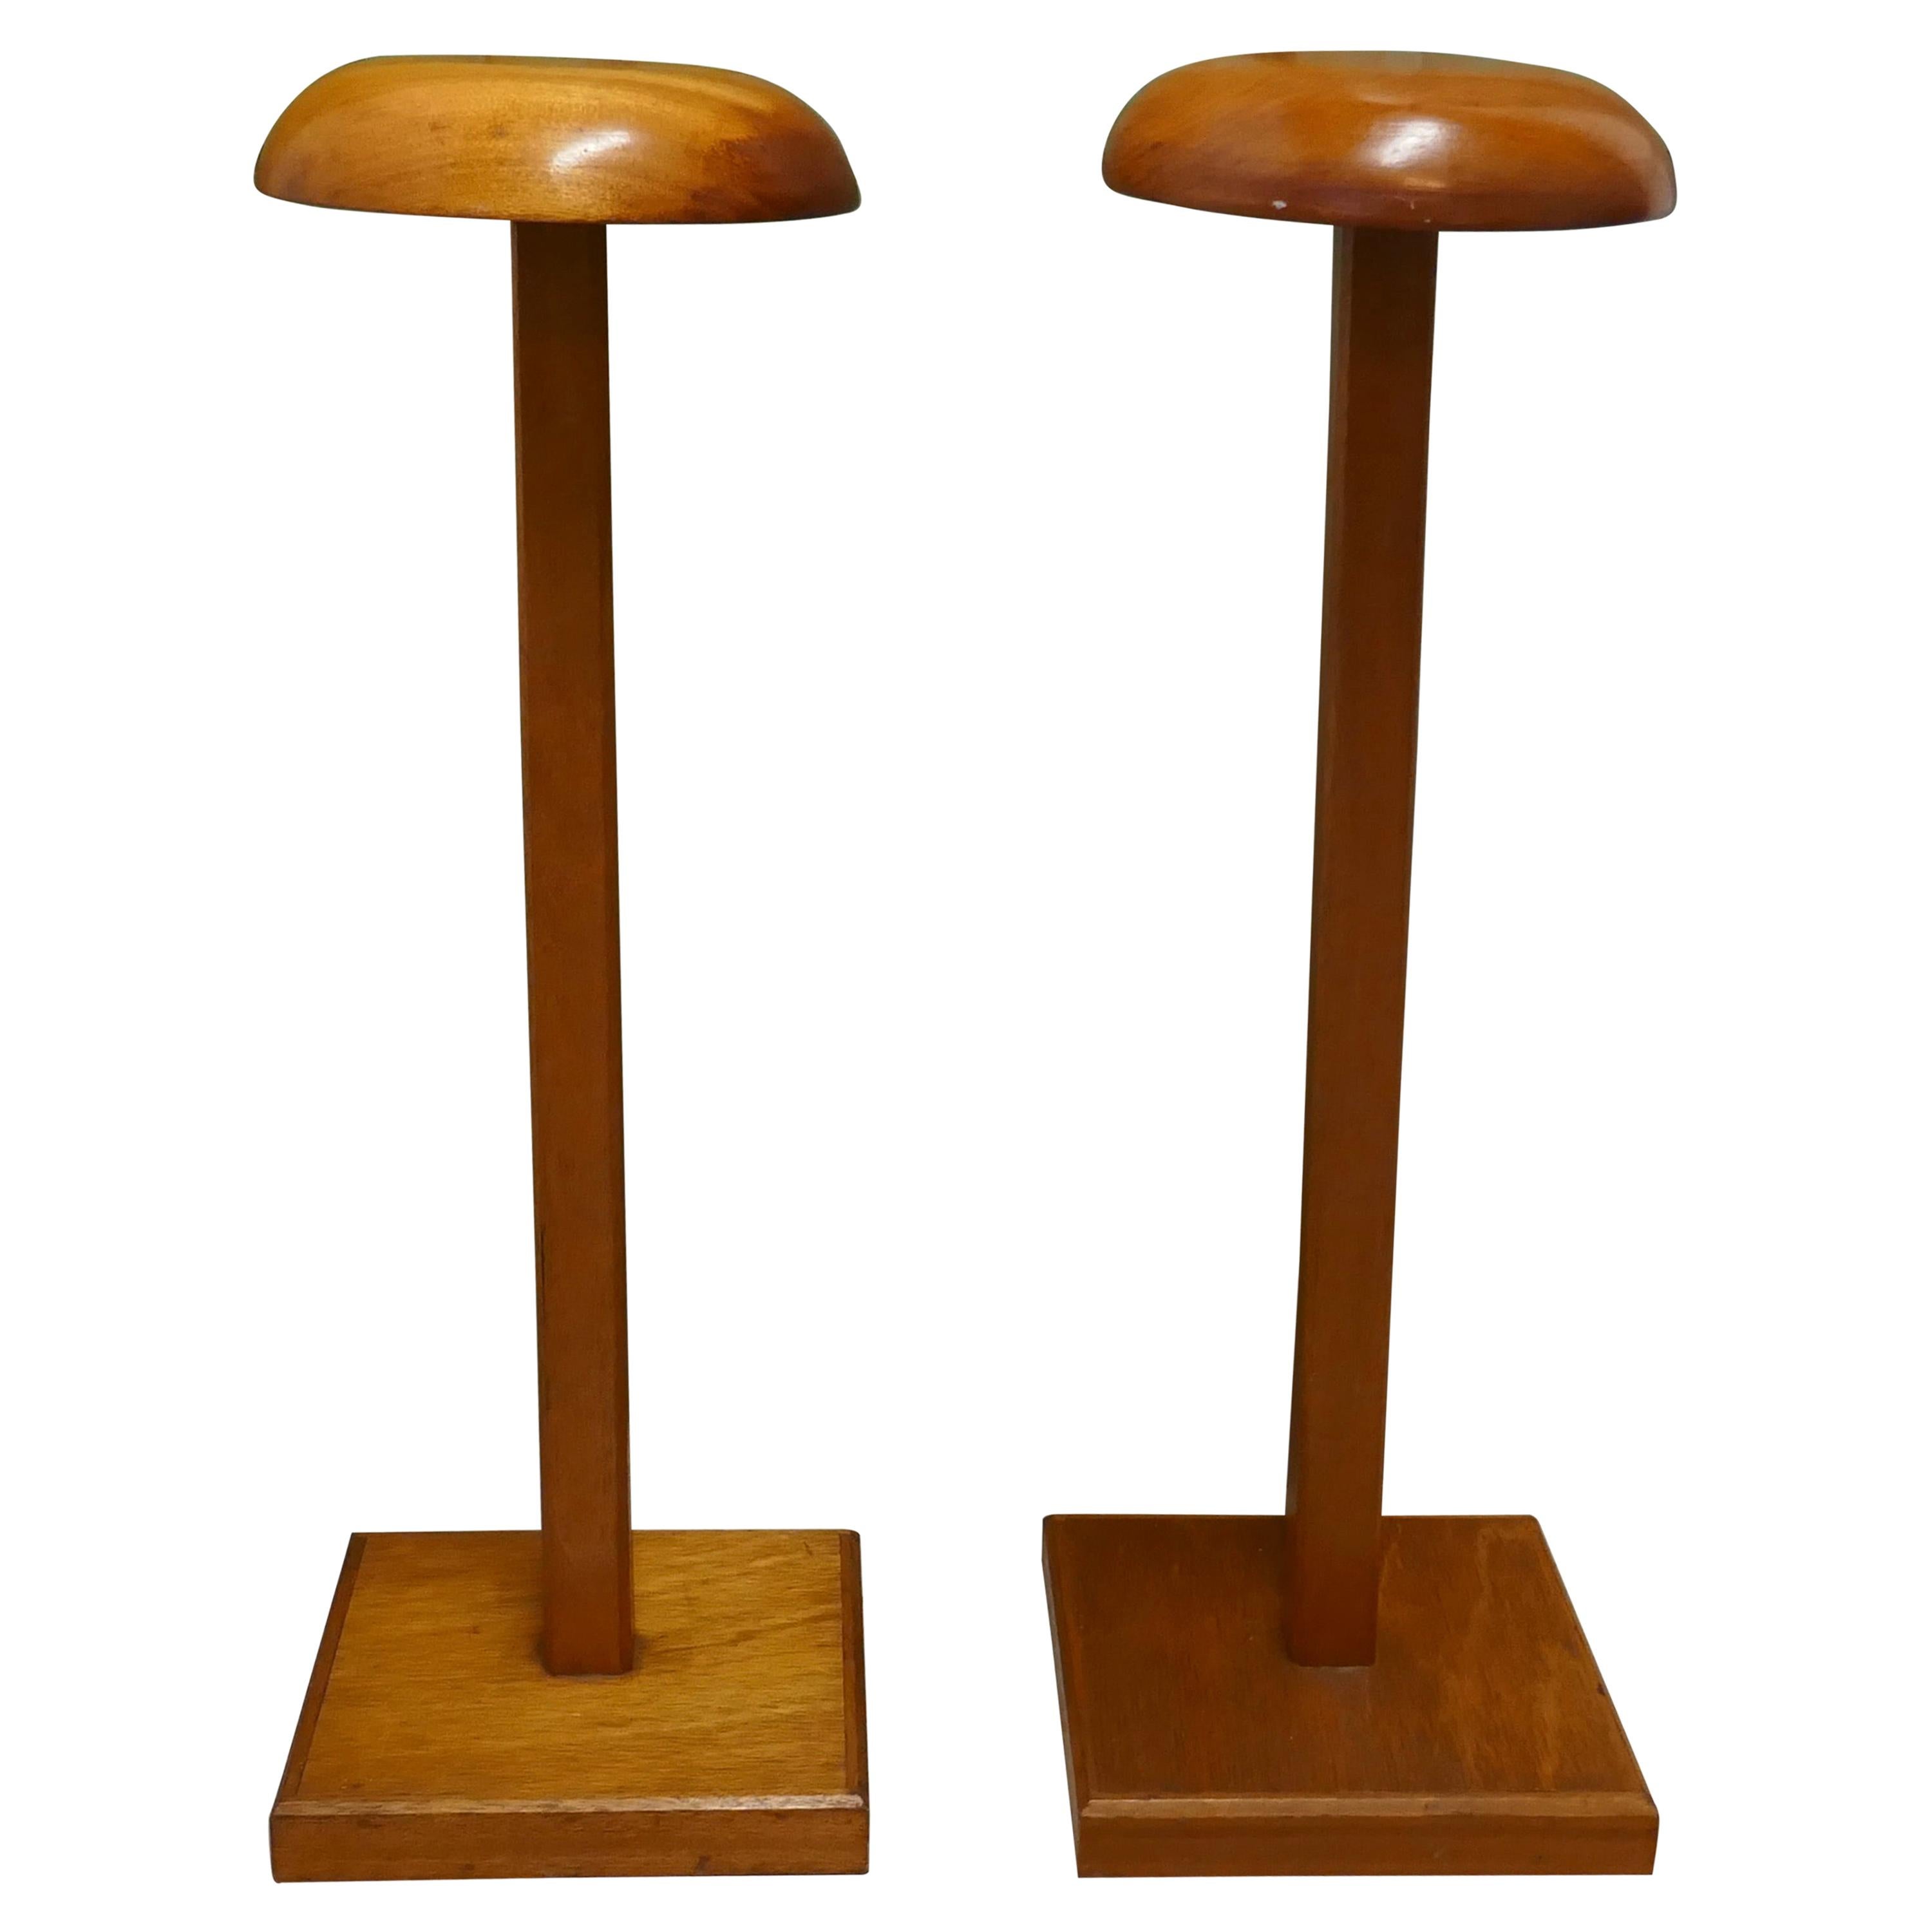 Taylor’s Wooden Fabric Display Stands